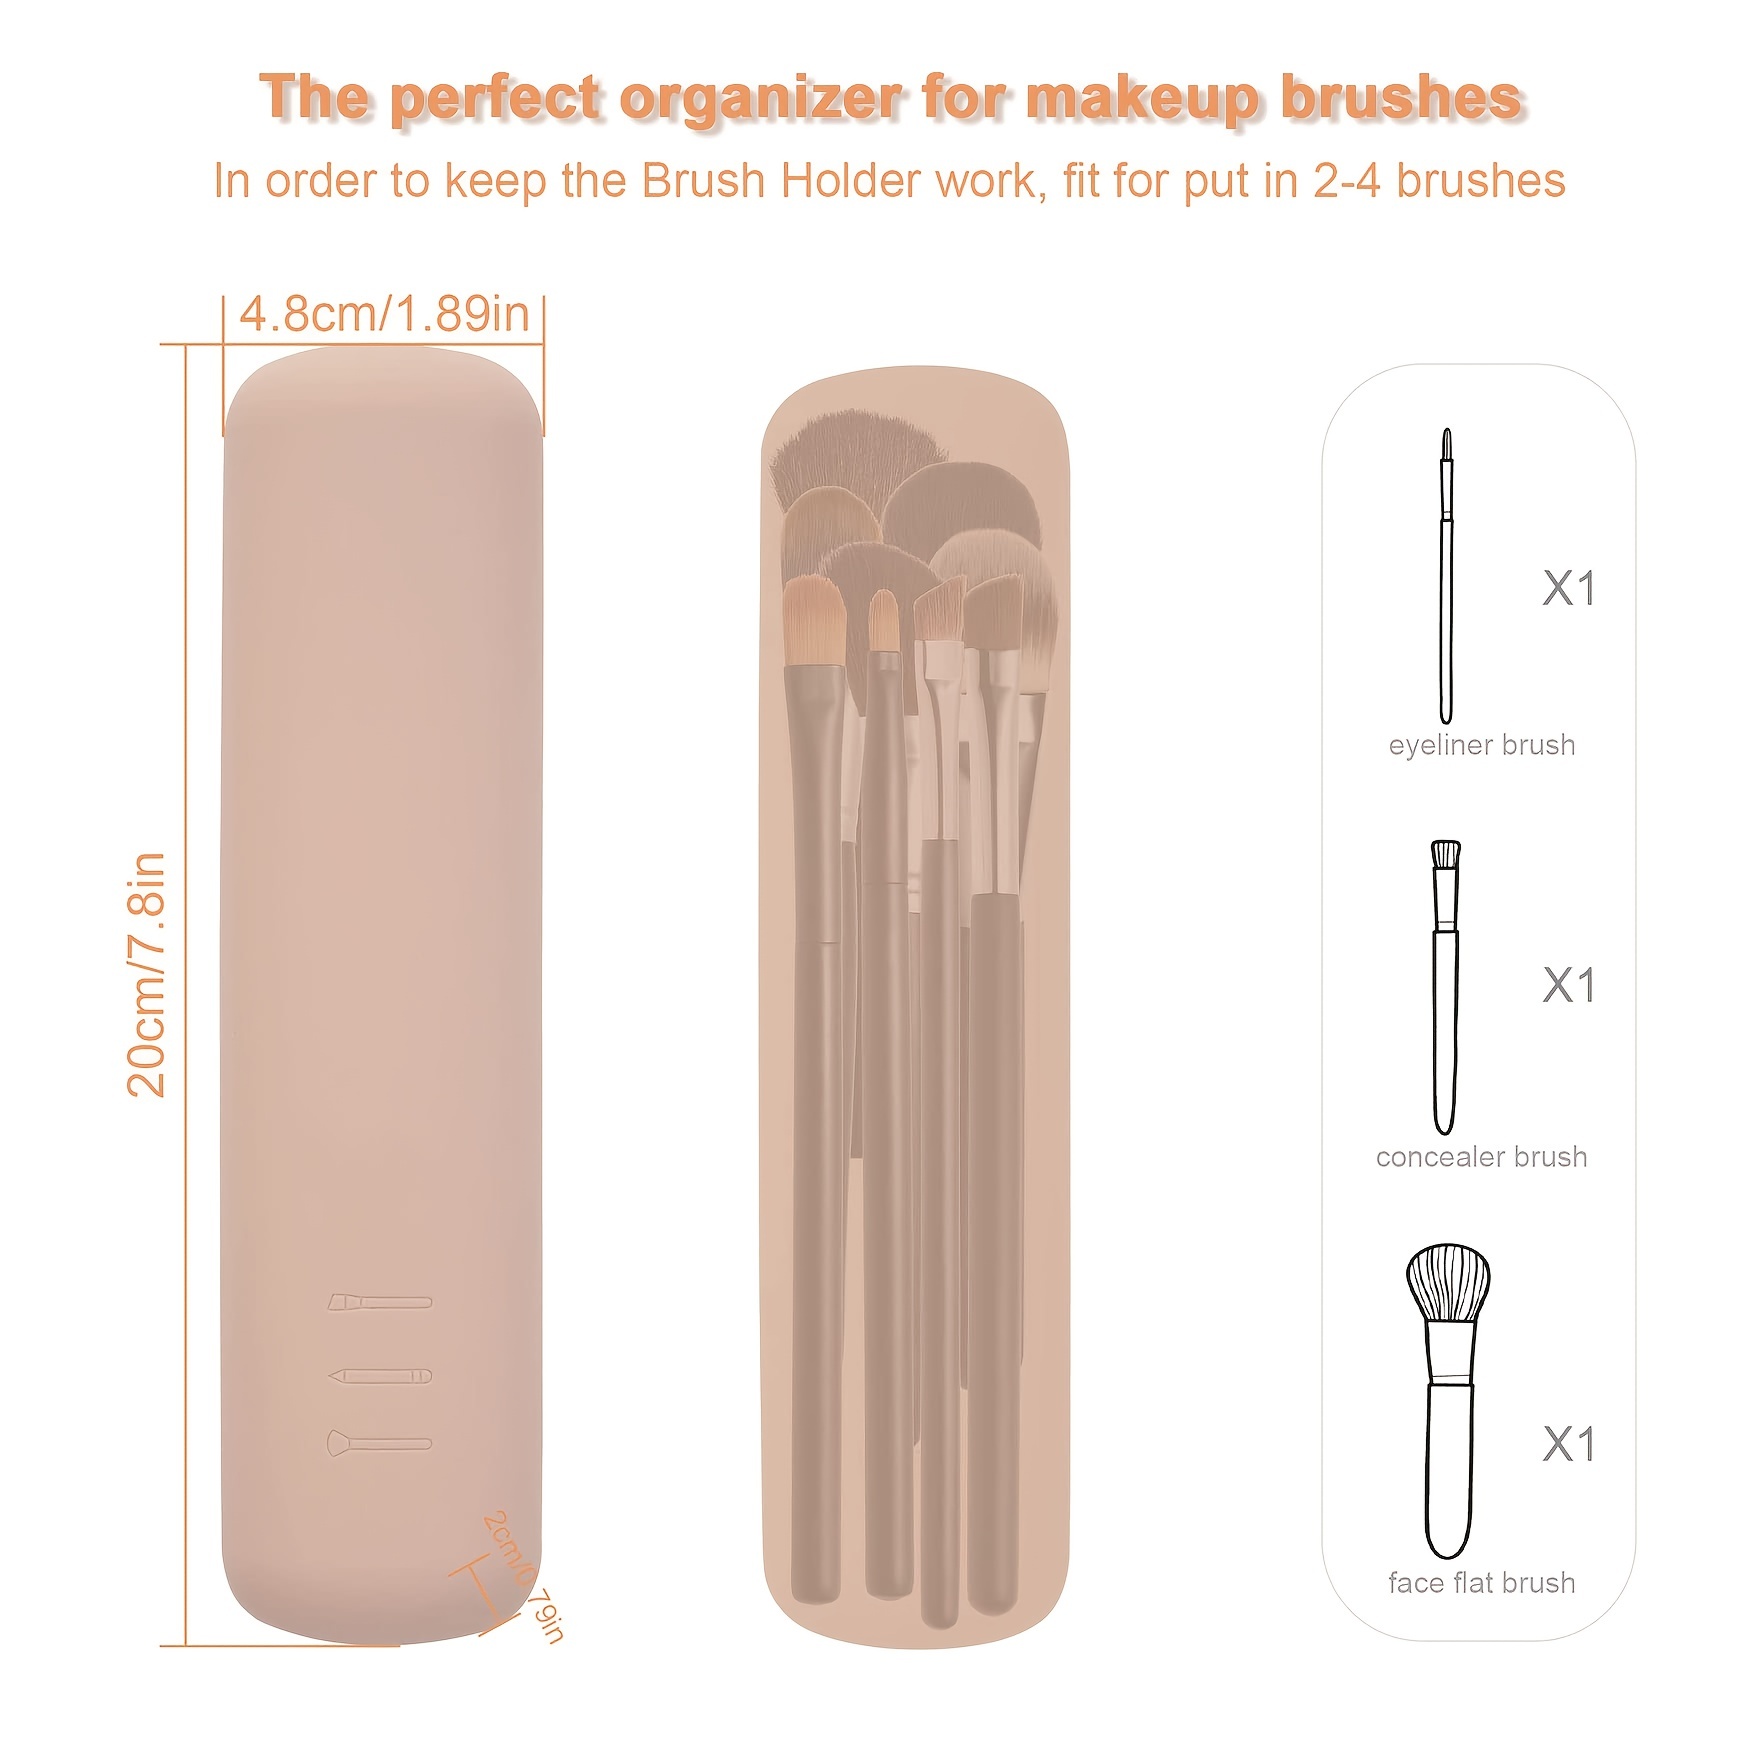 Bezox Makeup Brush Holder Travel Case - Silicon Make Up Brush Holder, Beauty Cosmetic Brush Container on The Go, Small Makeup Brush Pouch Bag - Khaki